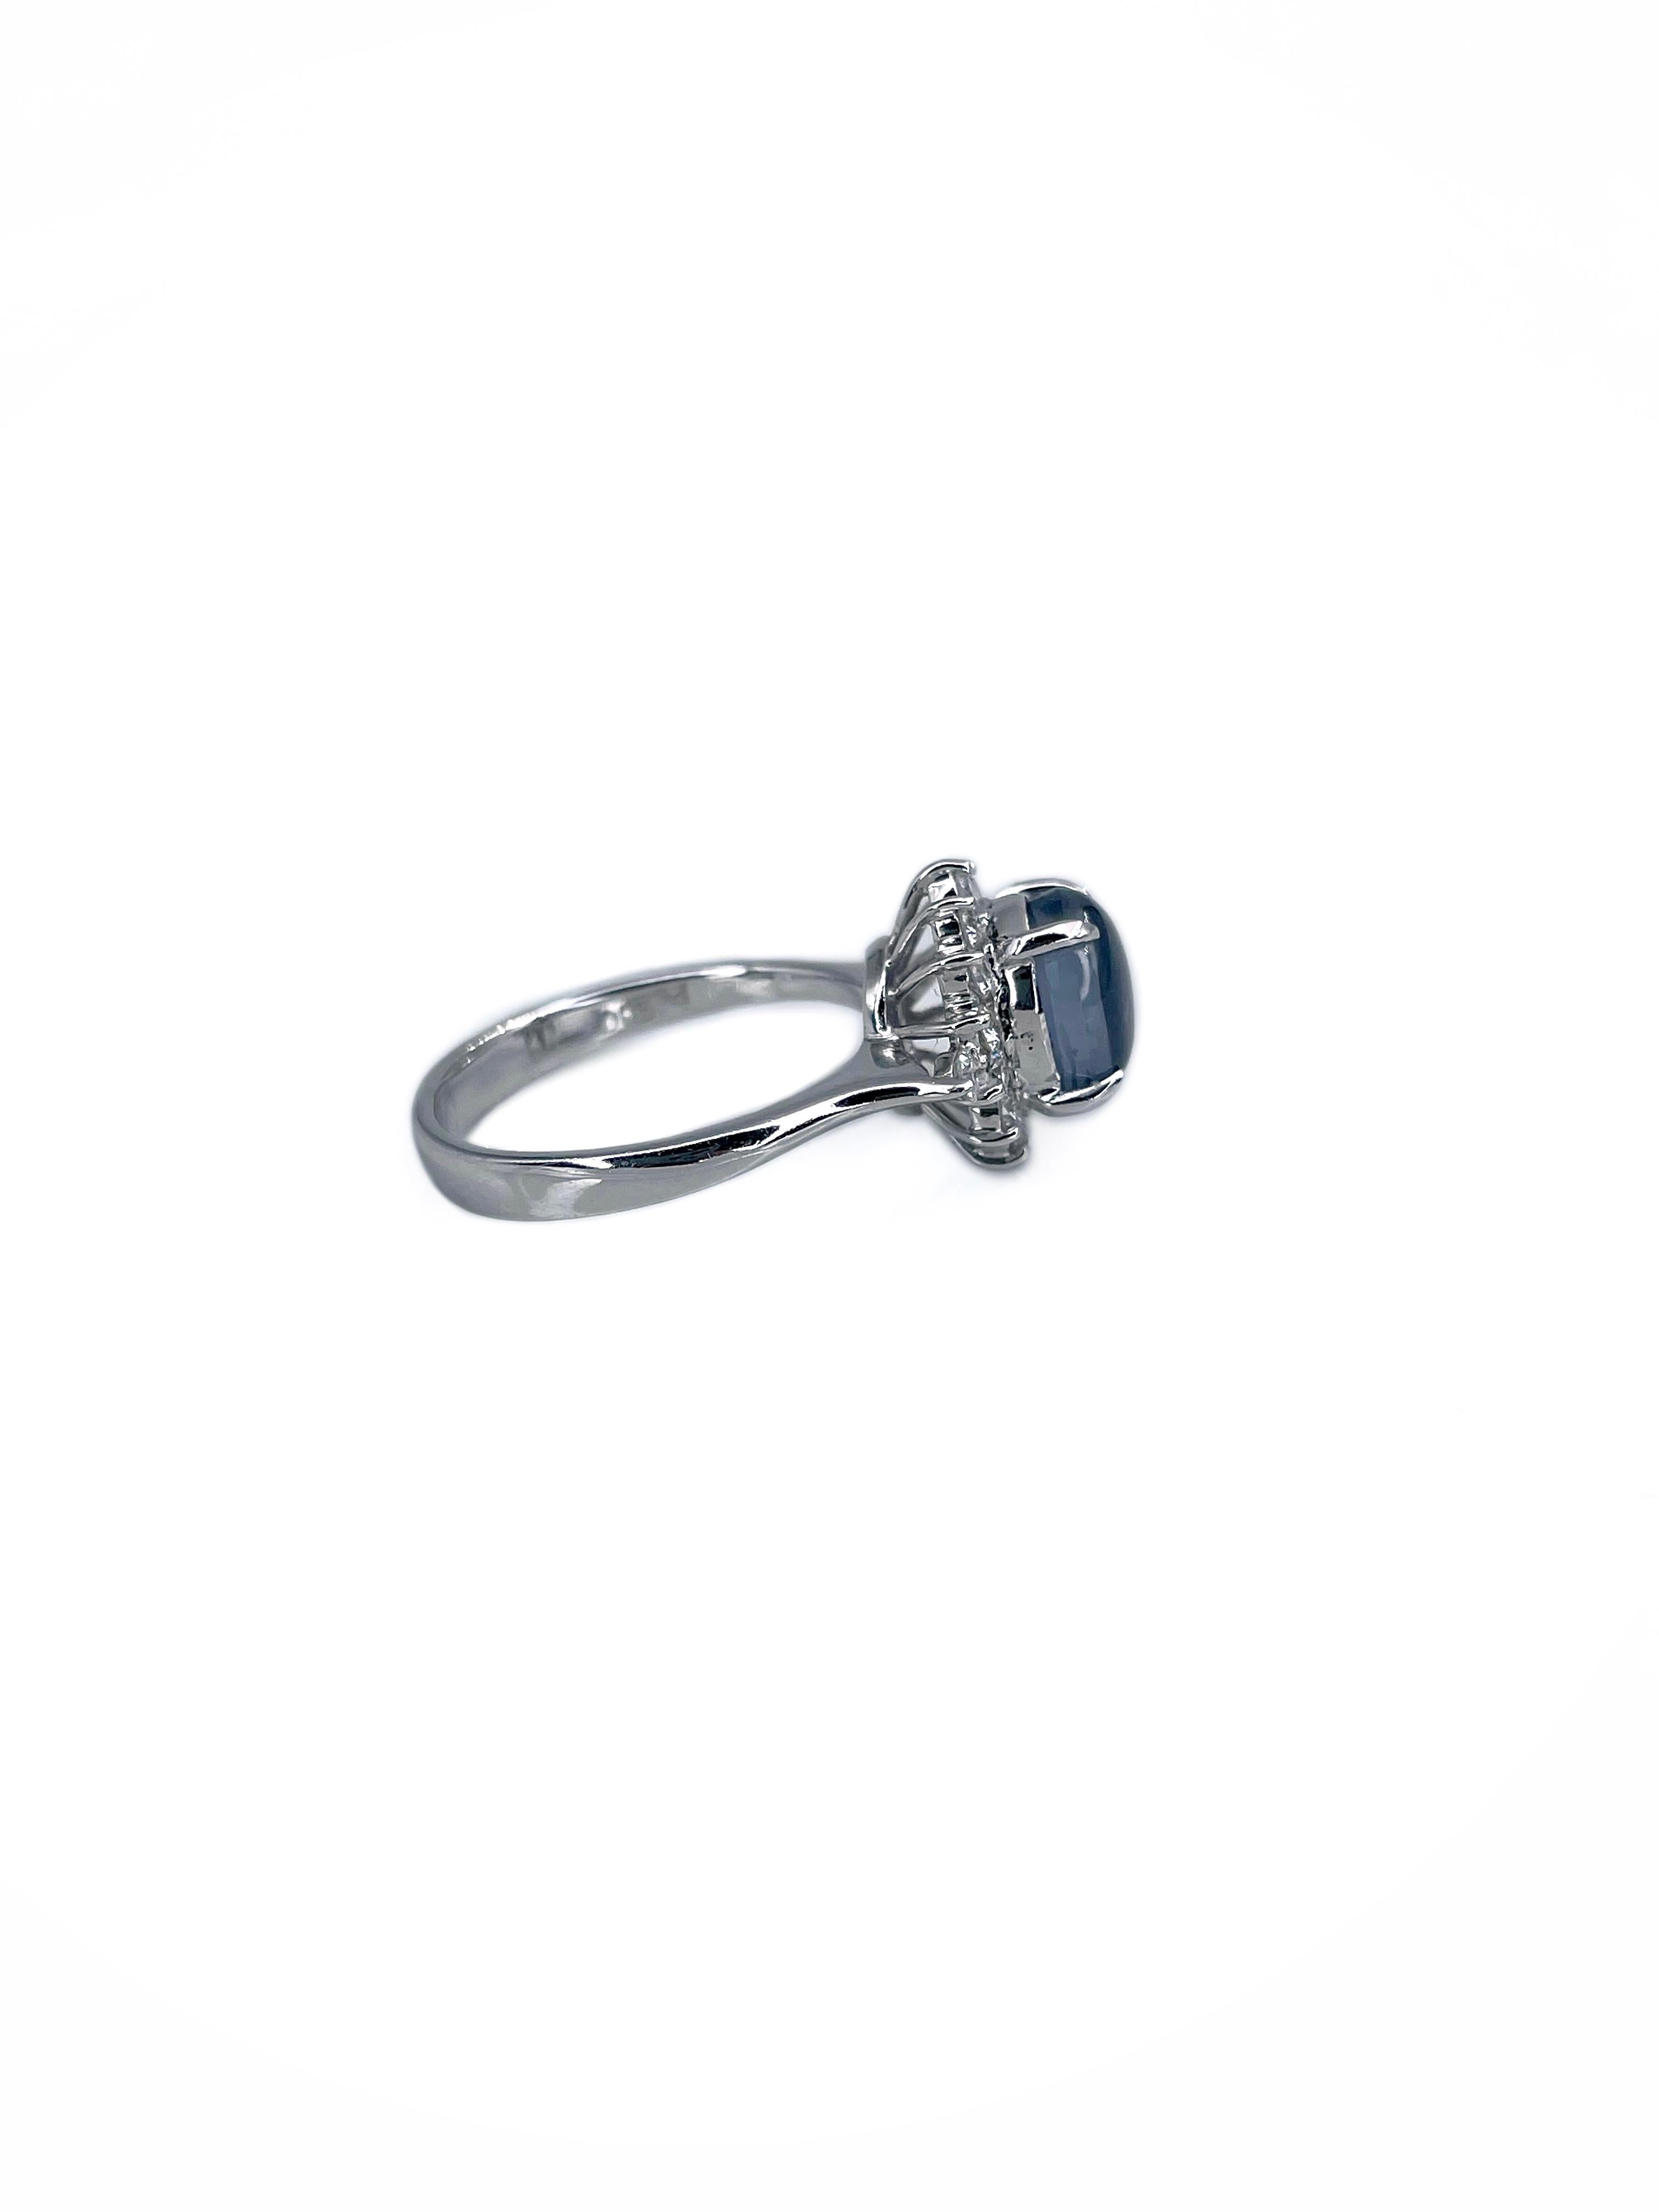 This is a modern cluster ring crafted in 900 hallmark platinum. Circa 1990. 

The piece features:  
- 1 sapphire, round shape, cabochon cut, 2.30ct, V 5/2, SI
- 16 diamonds, round brilliant cut, TW 0.35ct, RW-W, SI

Weight: 5.80g
Size: 16.5 (US